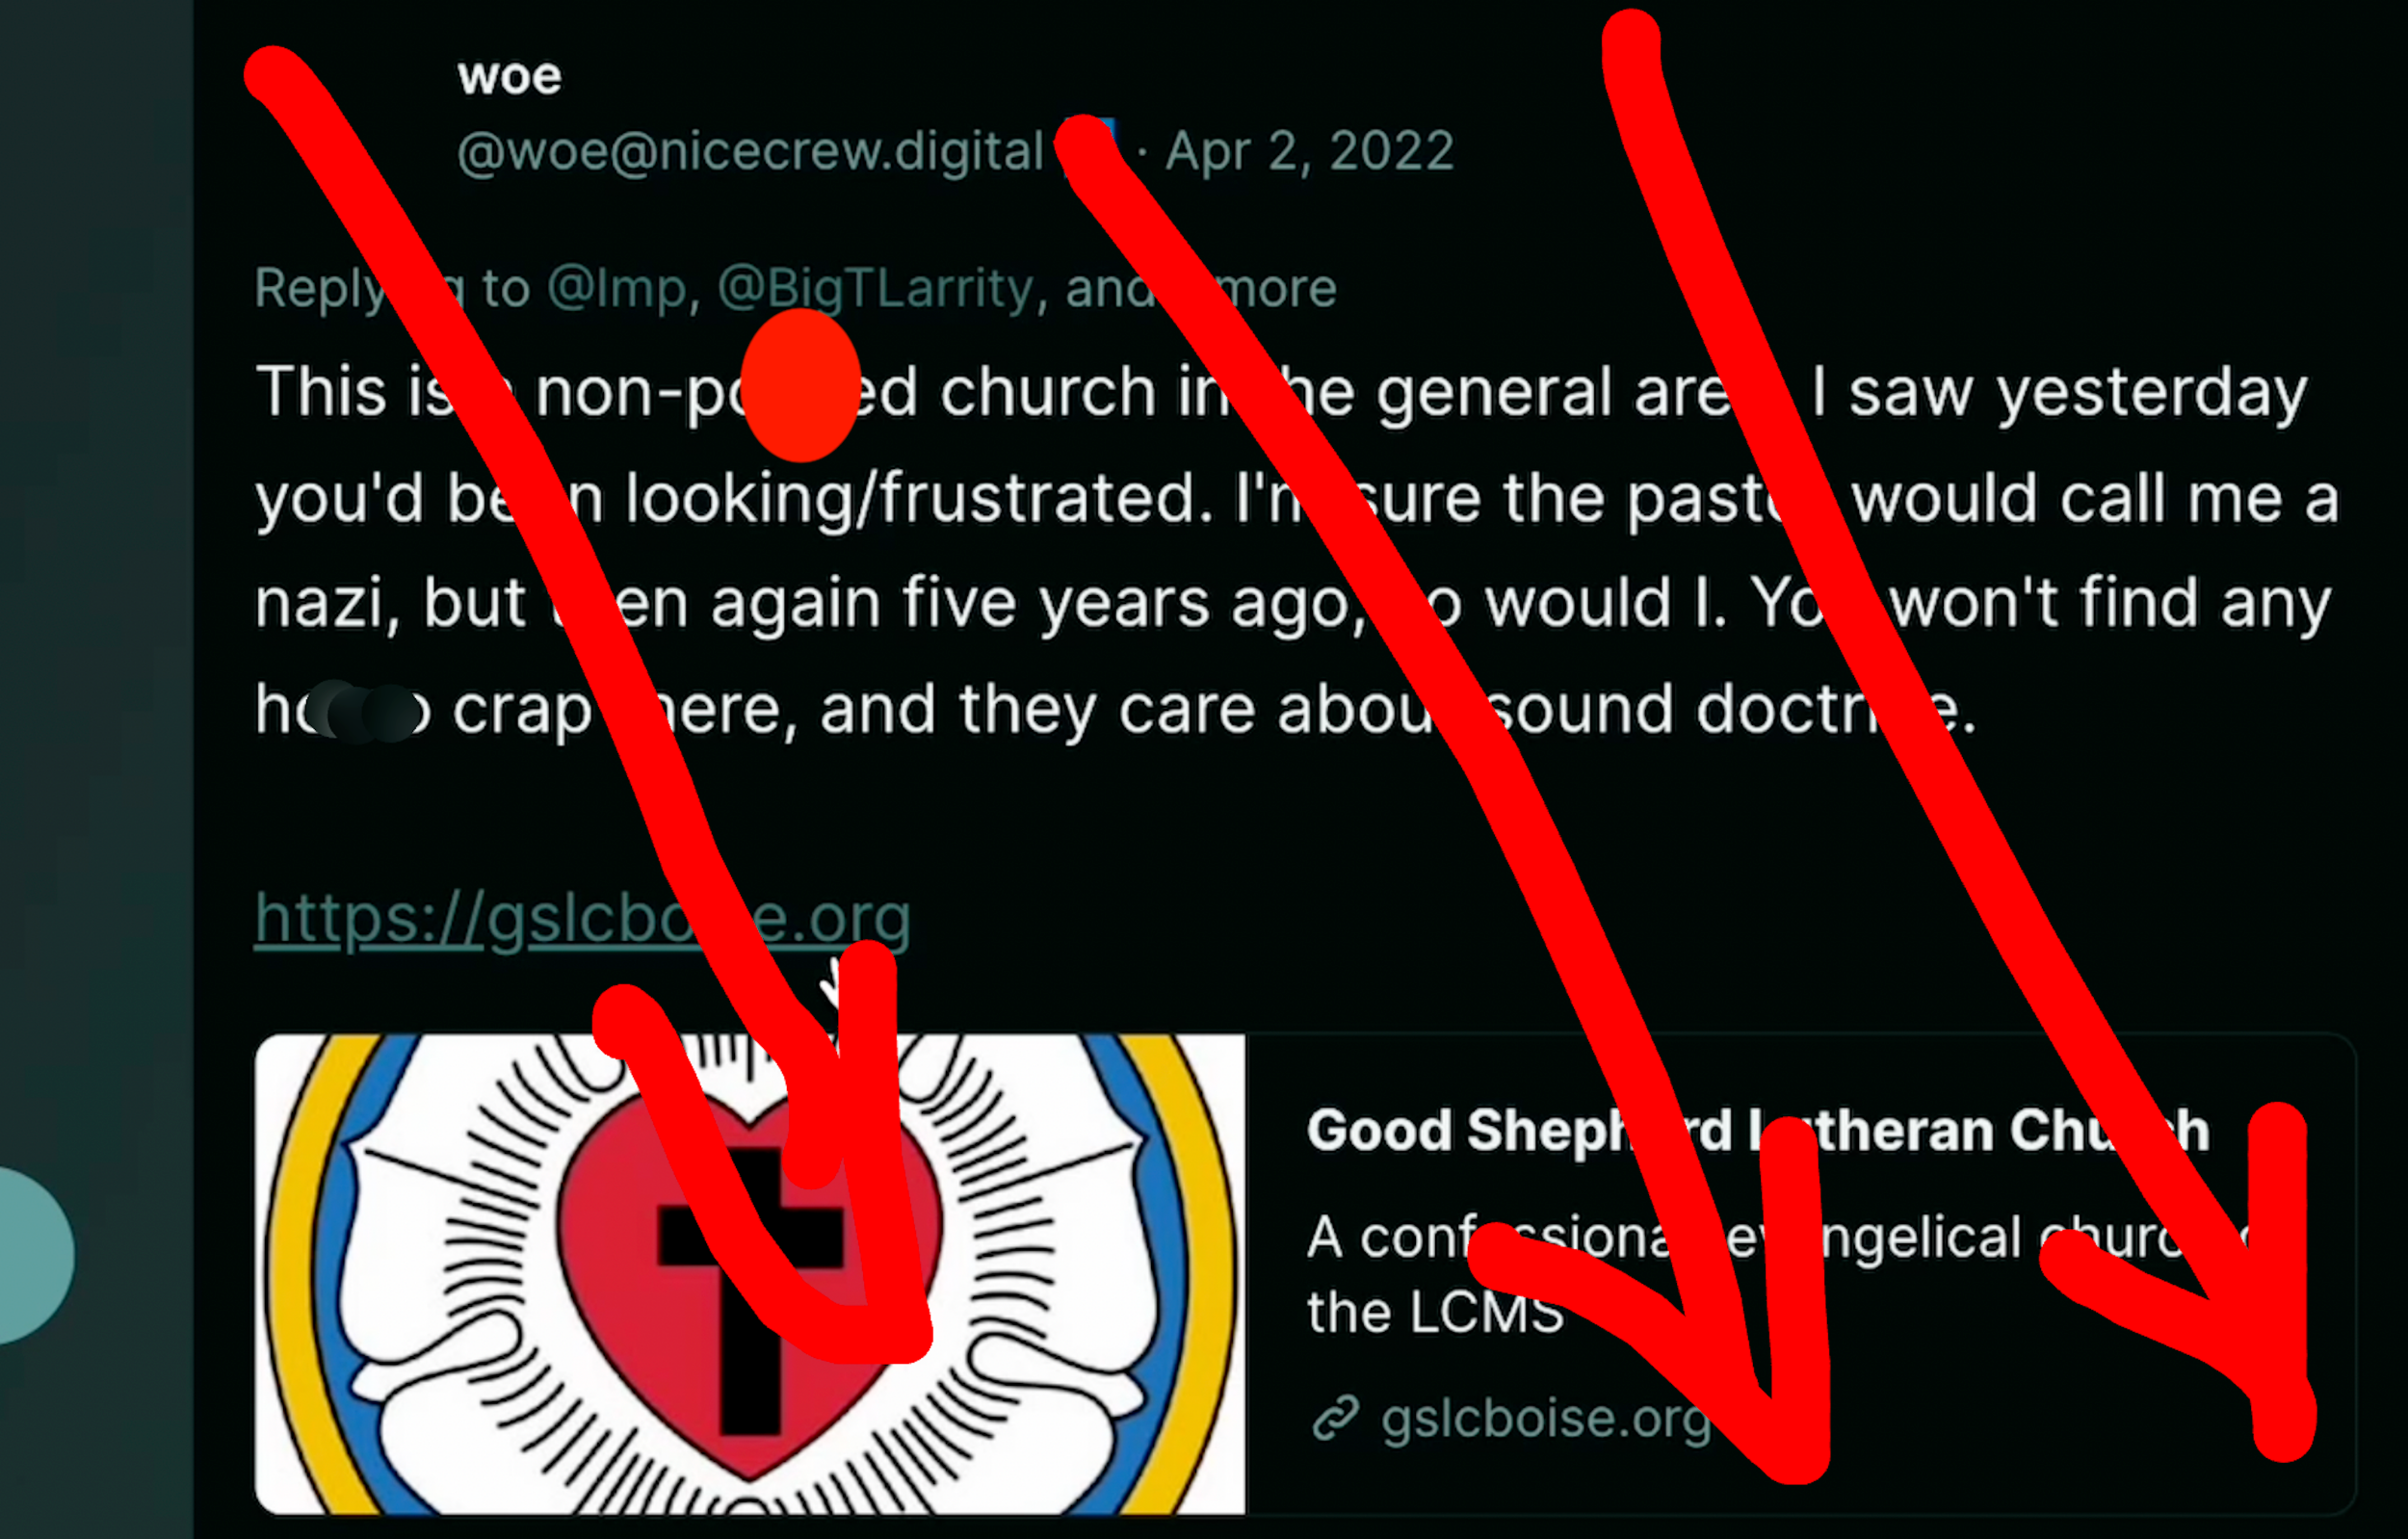 TW homophobia. Dumperth on Poast: "This is a non pozzed church in the general area. I saw yesterday you'd been looking/frustrated. I'm sure the pastor would call me a nazi, but then again five years ago, so would I. You won't find an y h*mo crap here, and they care about sound doctrine."